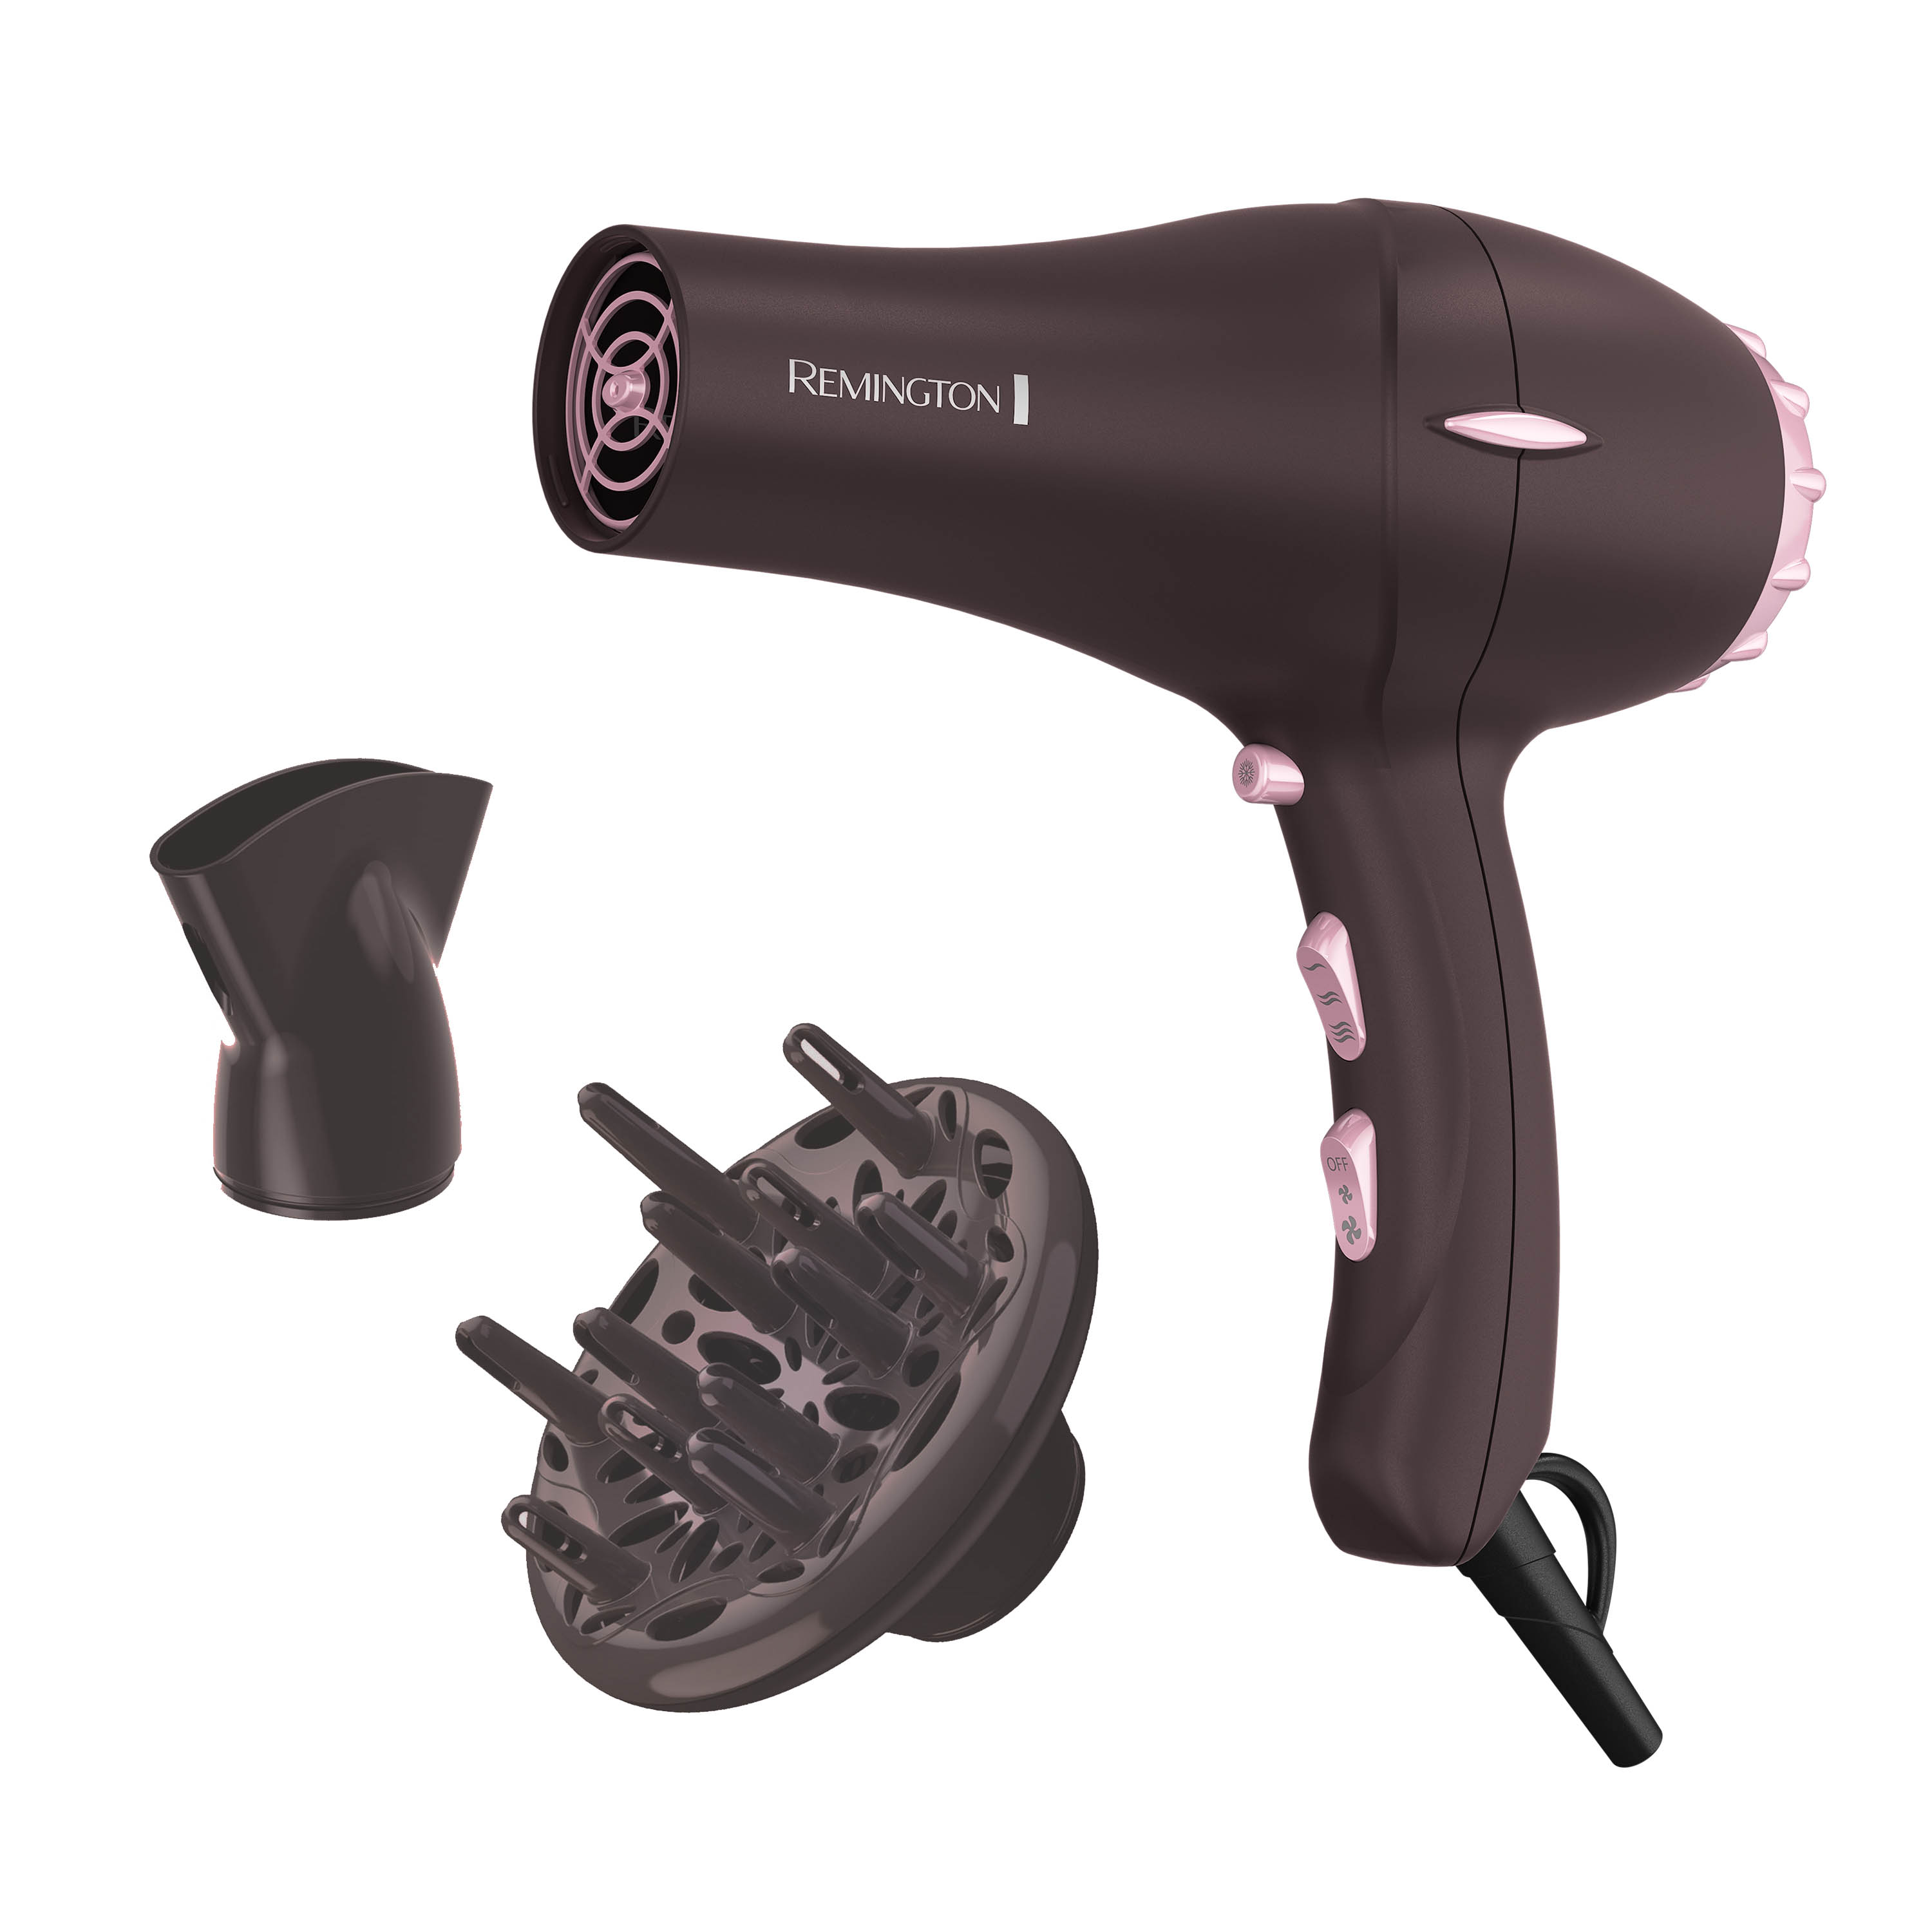 Remington Pro Pearl Soft Touch Professional Ceramic Hair Dryer with Concentrator and Diffuser, Ionic, 1875 Watts, Black - image 1 of 13